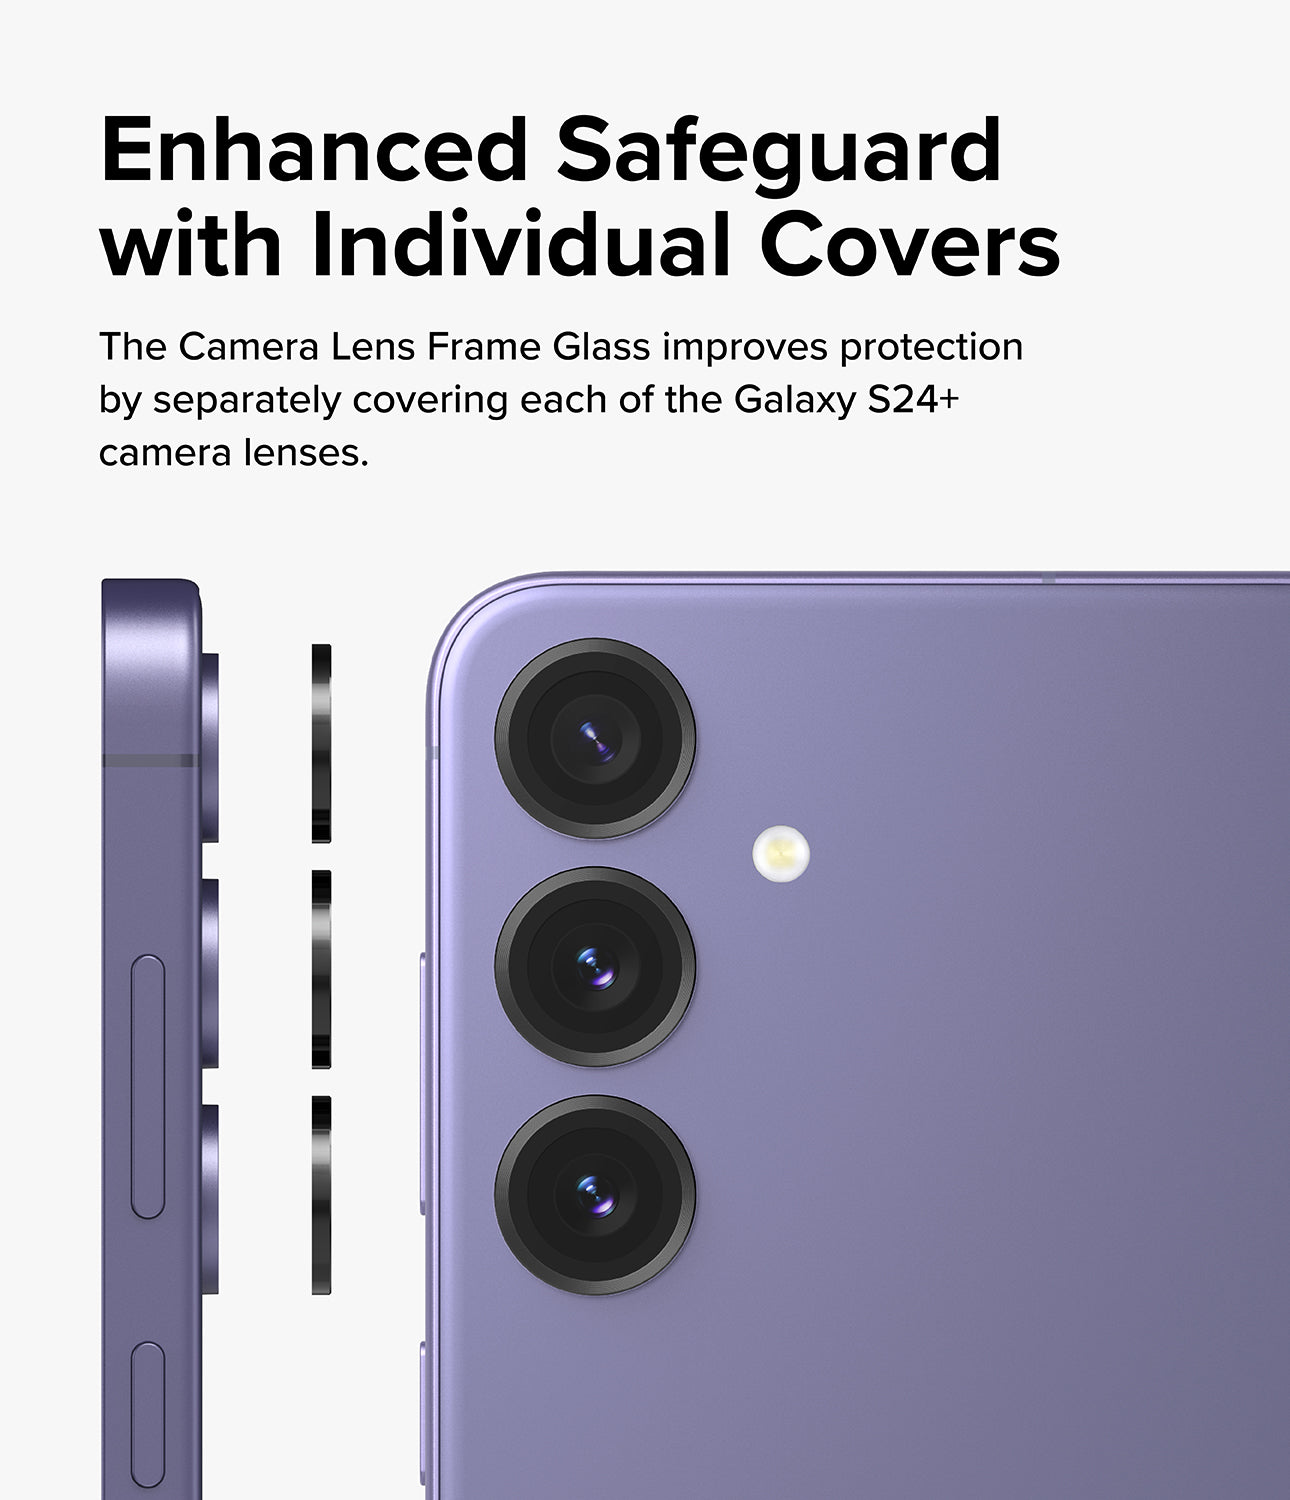 Galaxy S24 Plus Lens Protector | Camera Lens Frame Glass - Enhanced Safeguard with Individual Covers. The Camera Lens Frame Glass improves protection by separately covering each of the Galaxy S24+ camera lenses.